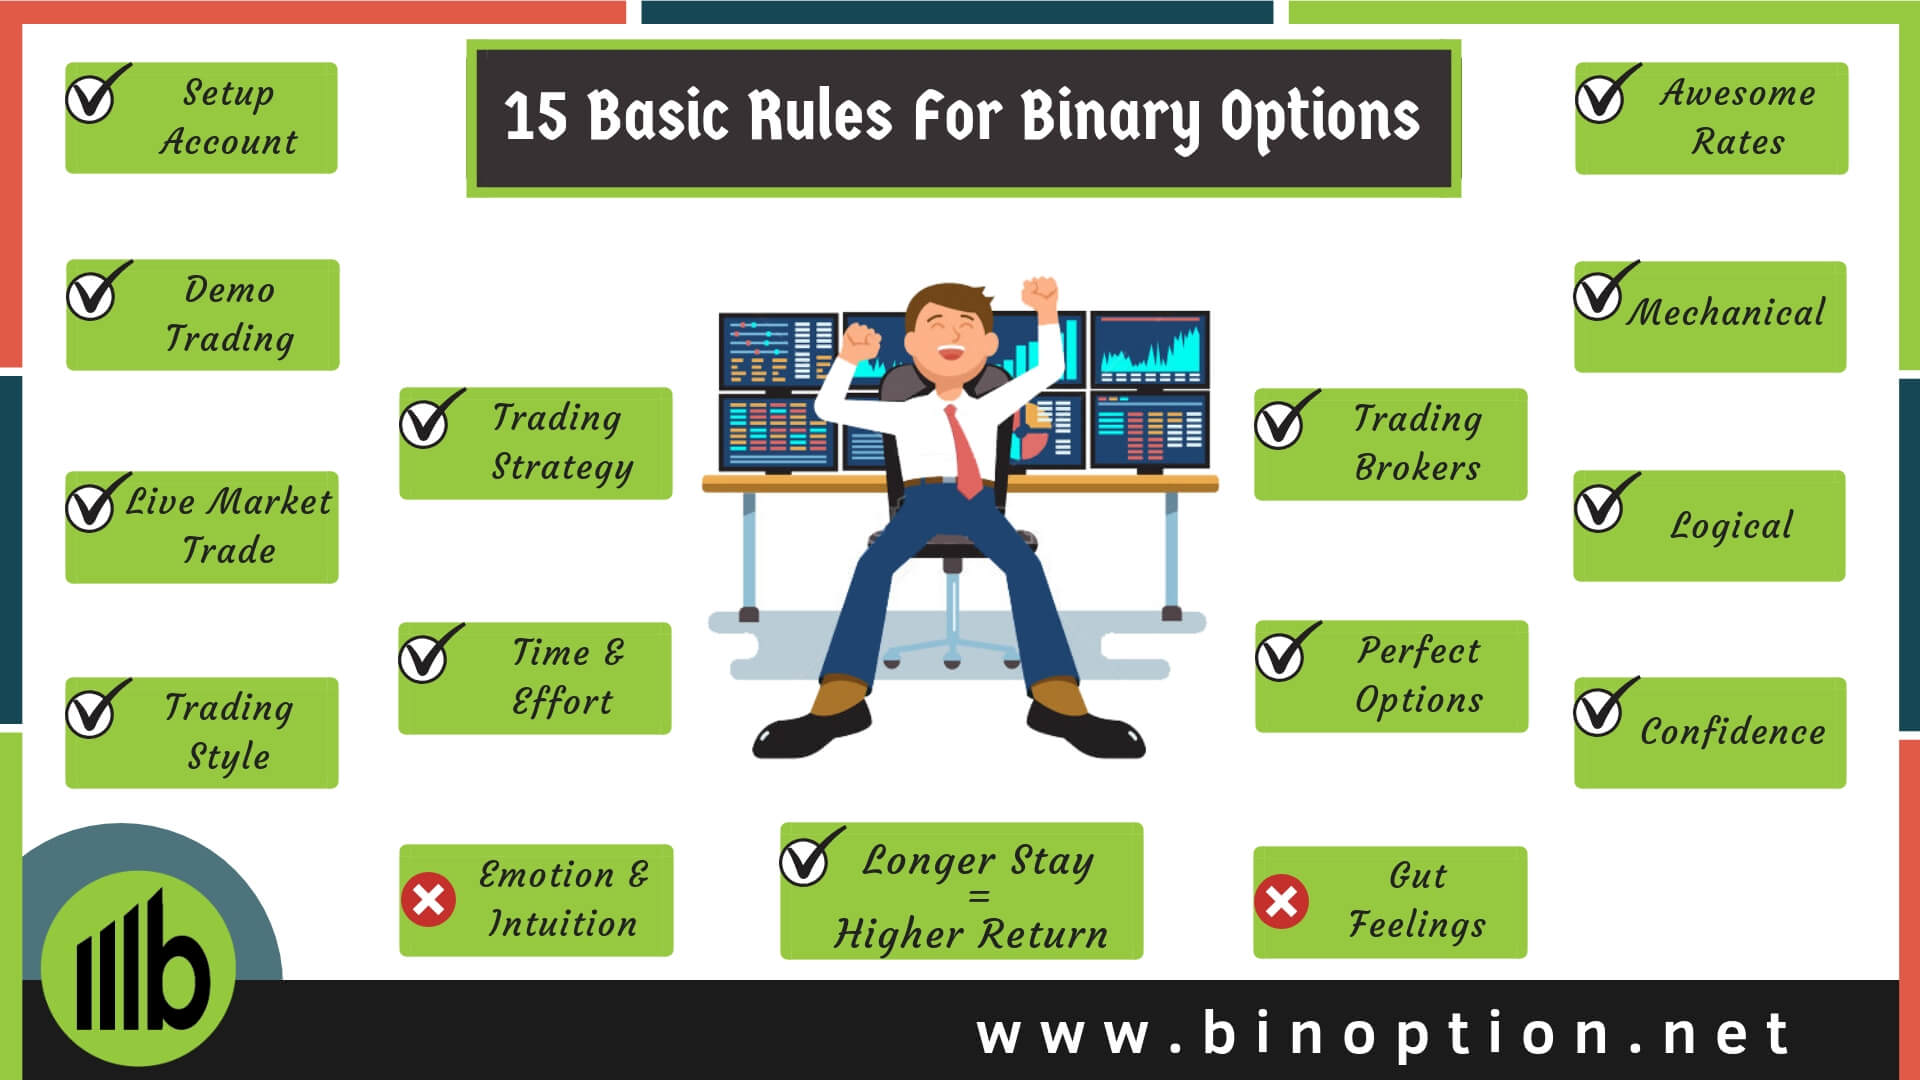 Make money with binary options in 3 simple ways